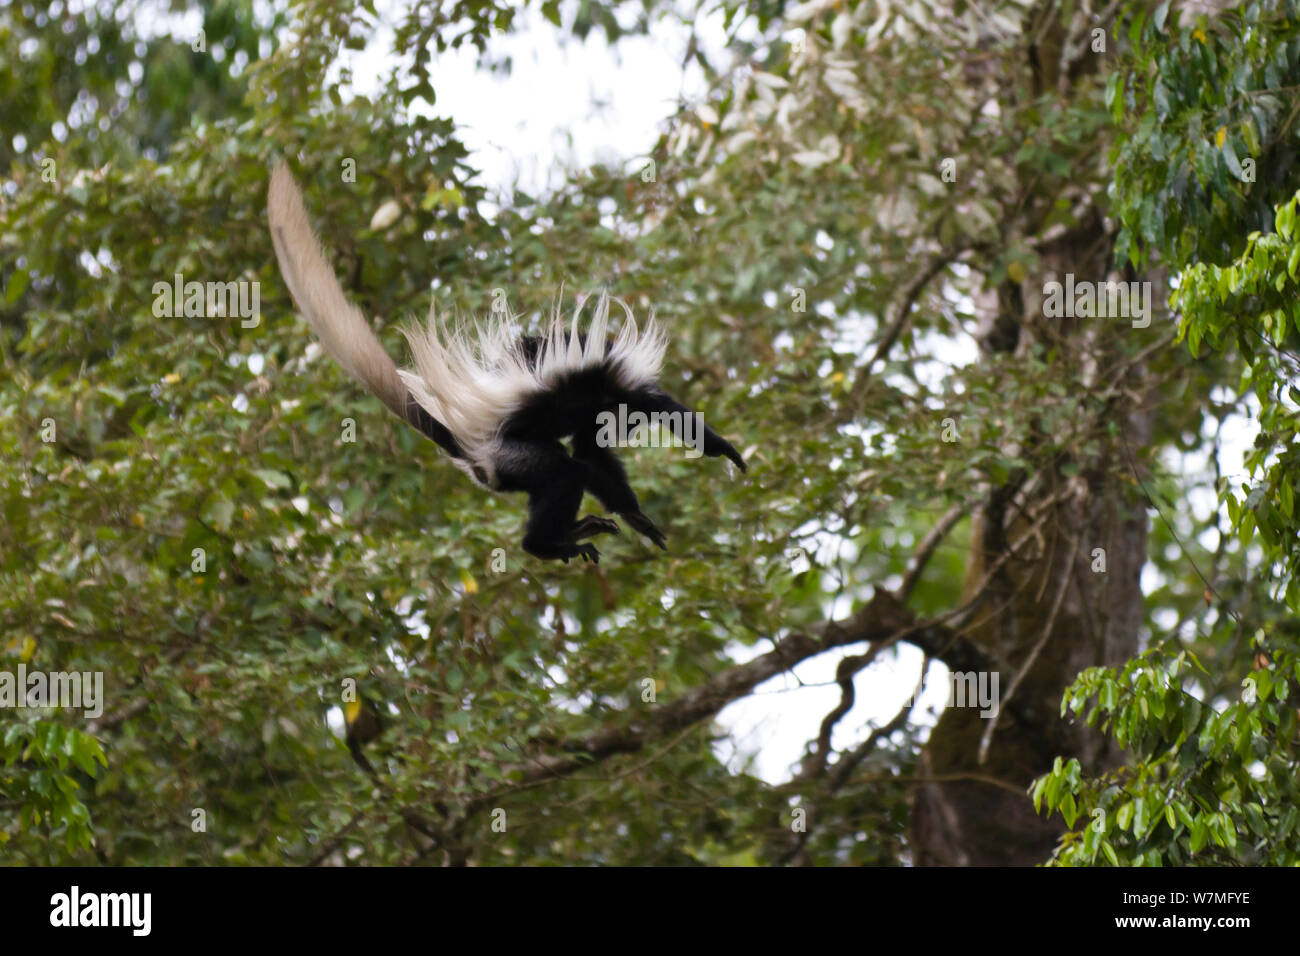 Black and White Colobus monkey (Colobus guereza) leaping from tree to tree, Arusha National Park, Tanzania, East Africa Stock Photo